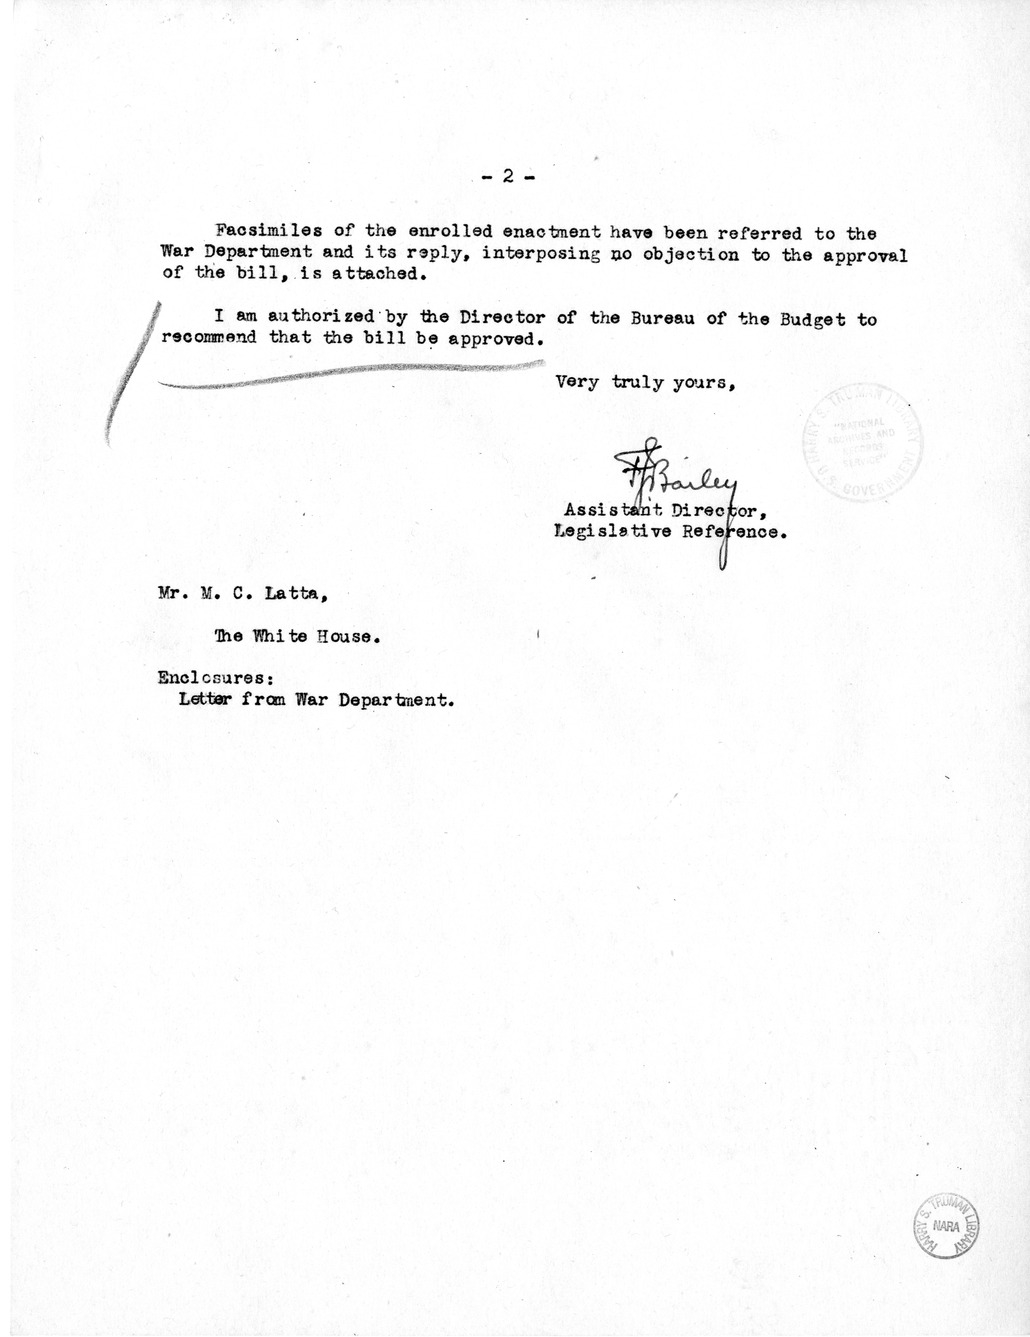 Memorandum from Frederick J. Bailey to M. C. Latta, H.R. 904, For the Relief of Fred A. Lower, with Attachments